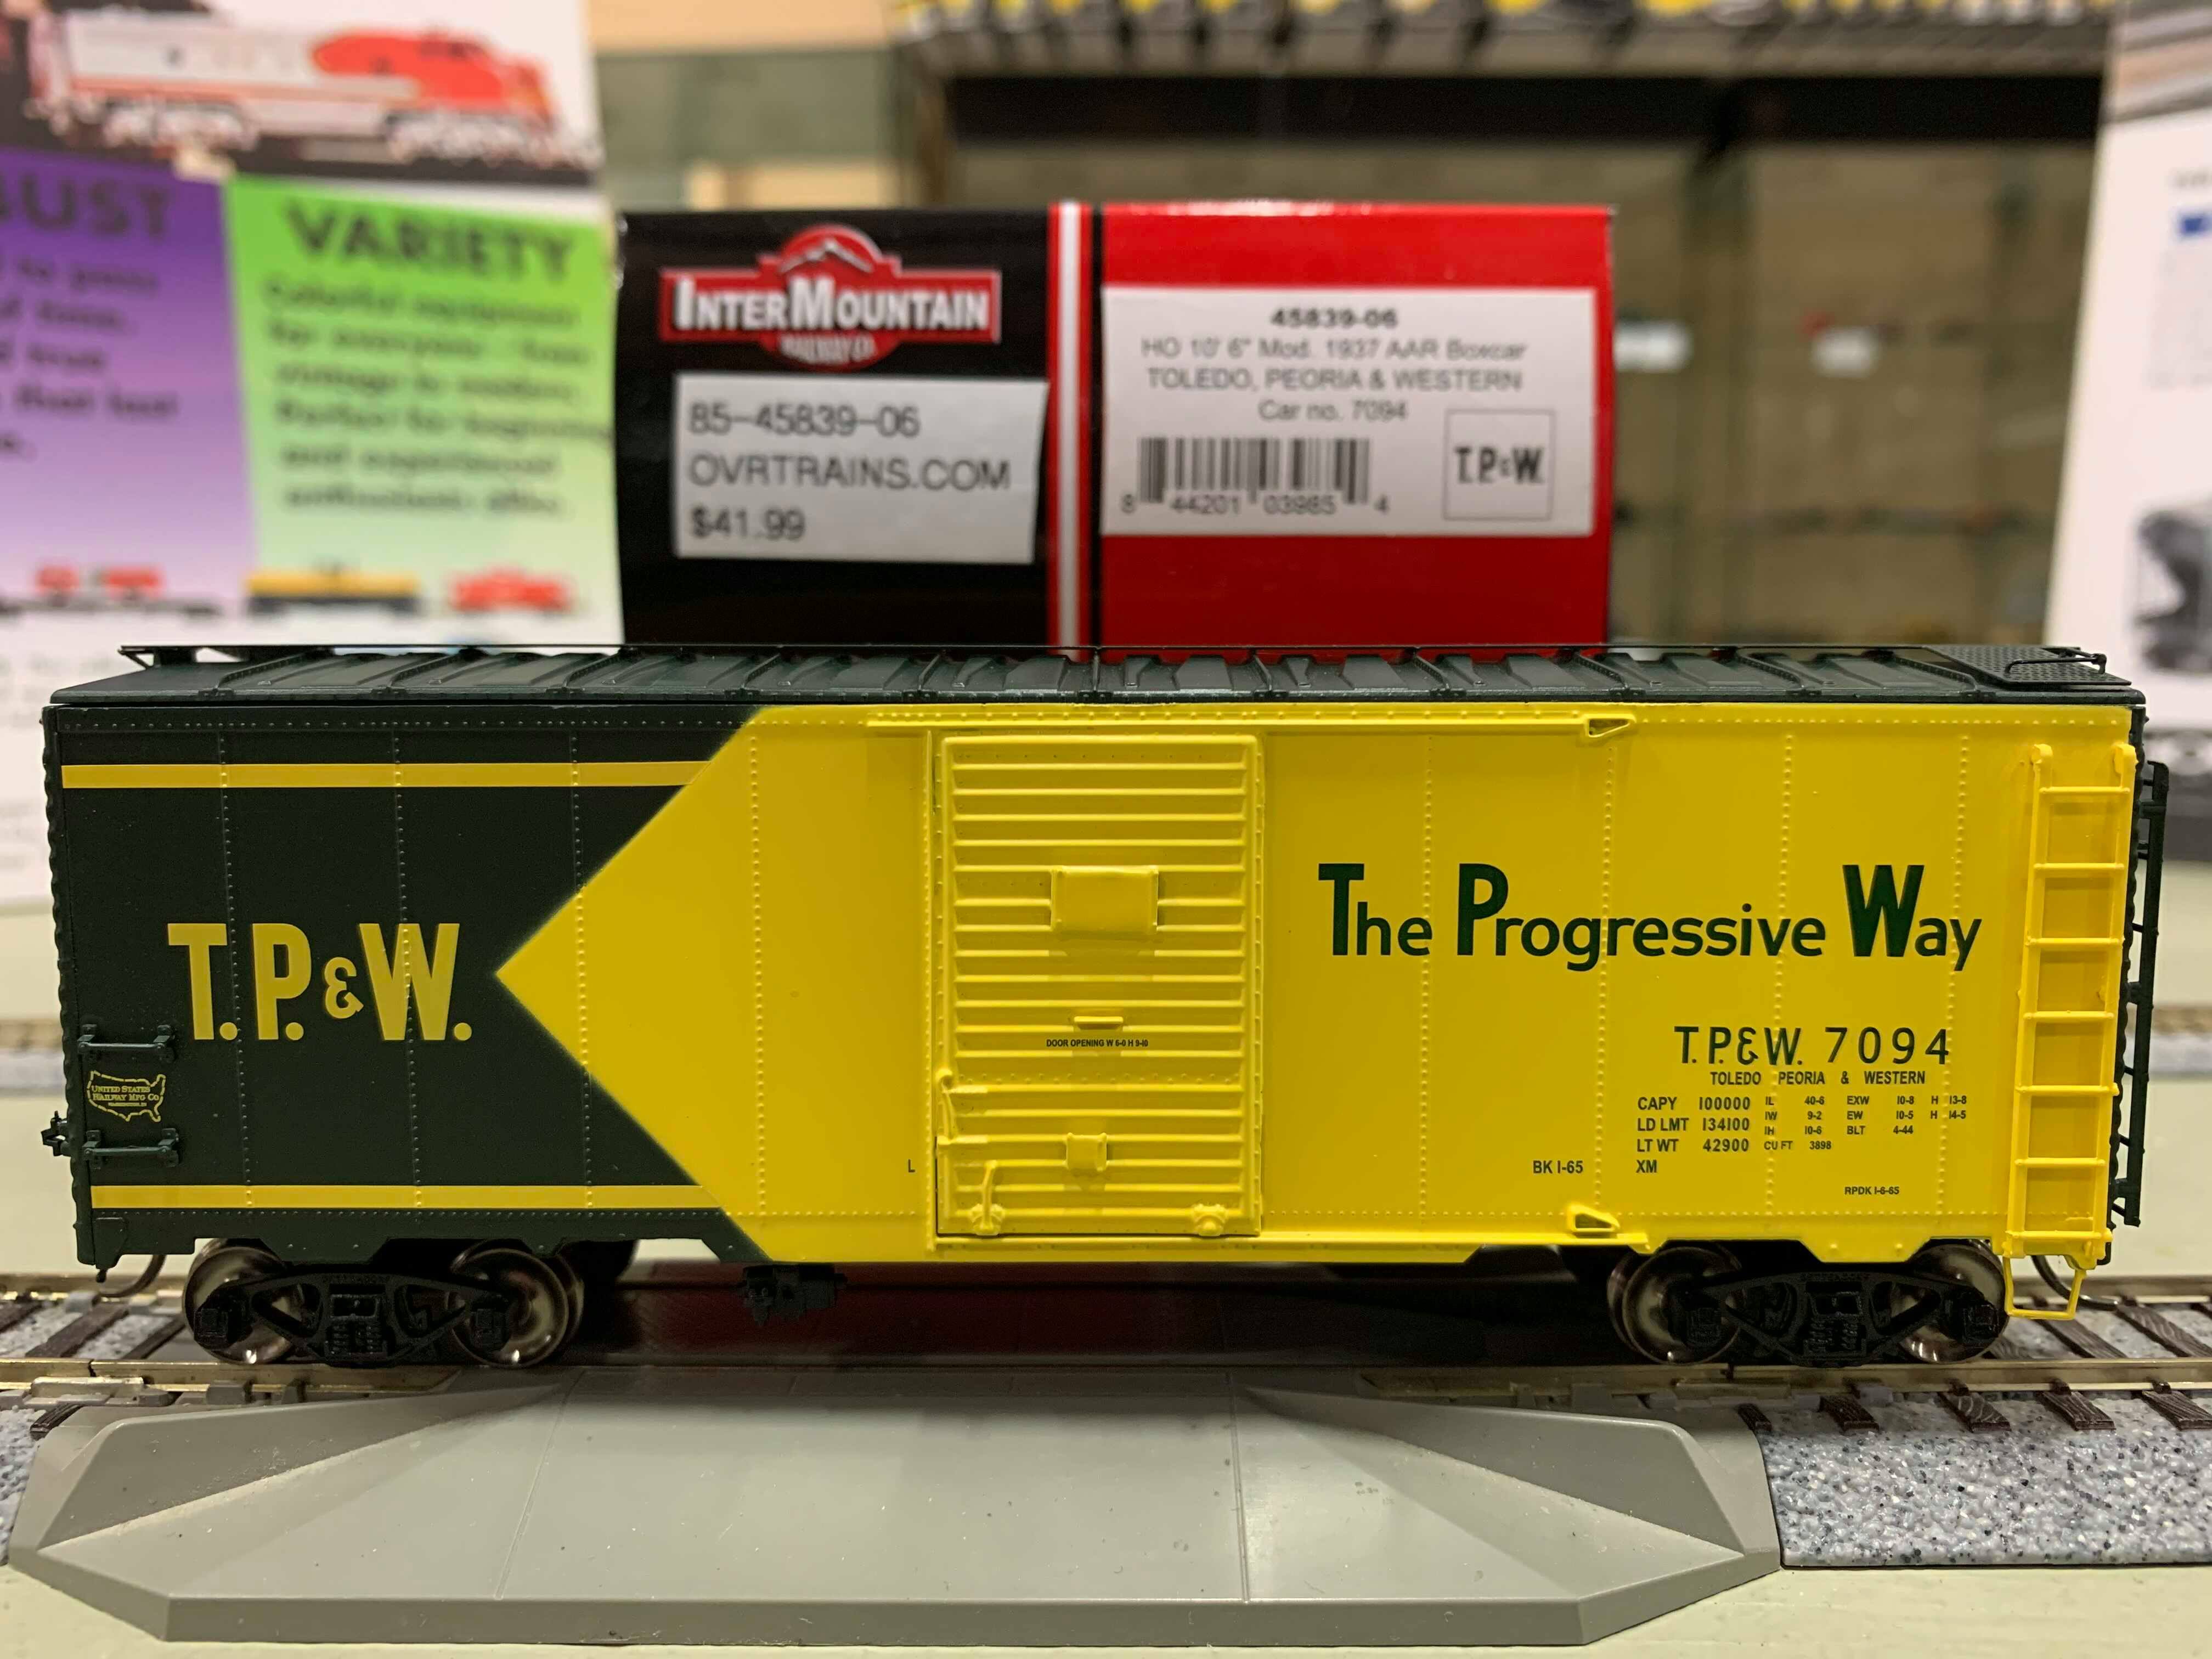 Intermountain 45839-02 HO Scale - 10Ft 6In Modified 1937 AAR Boxcar - Toledo, Peoria & Western #7022